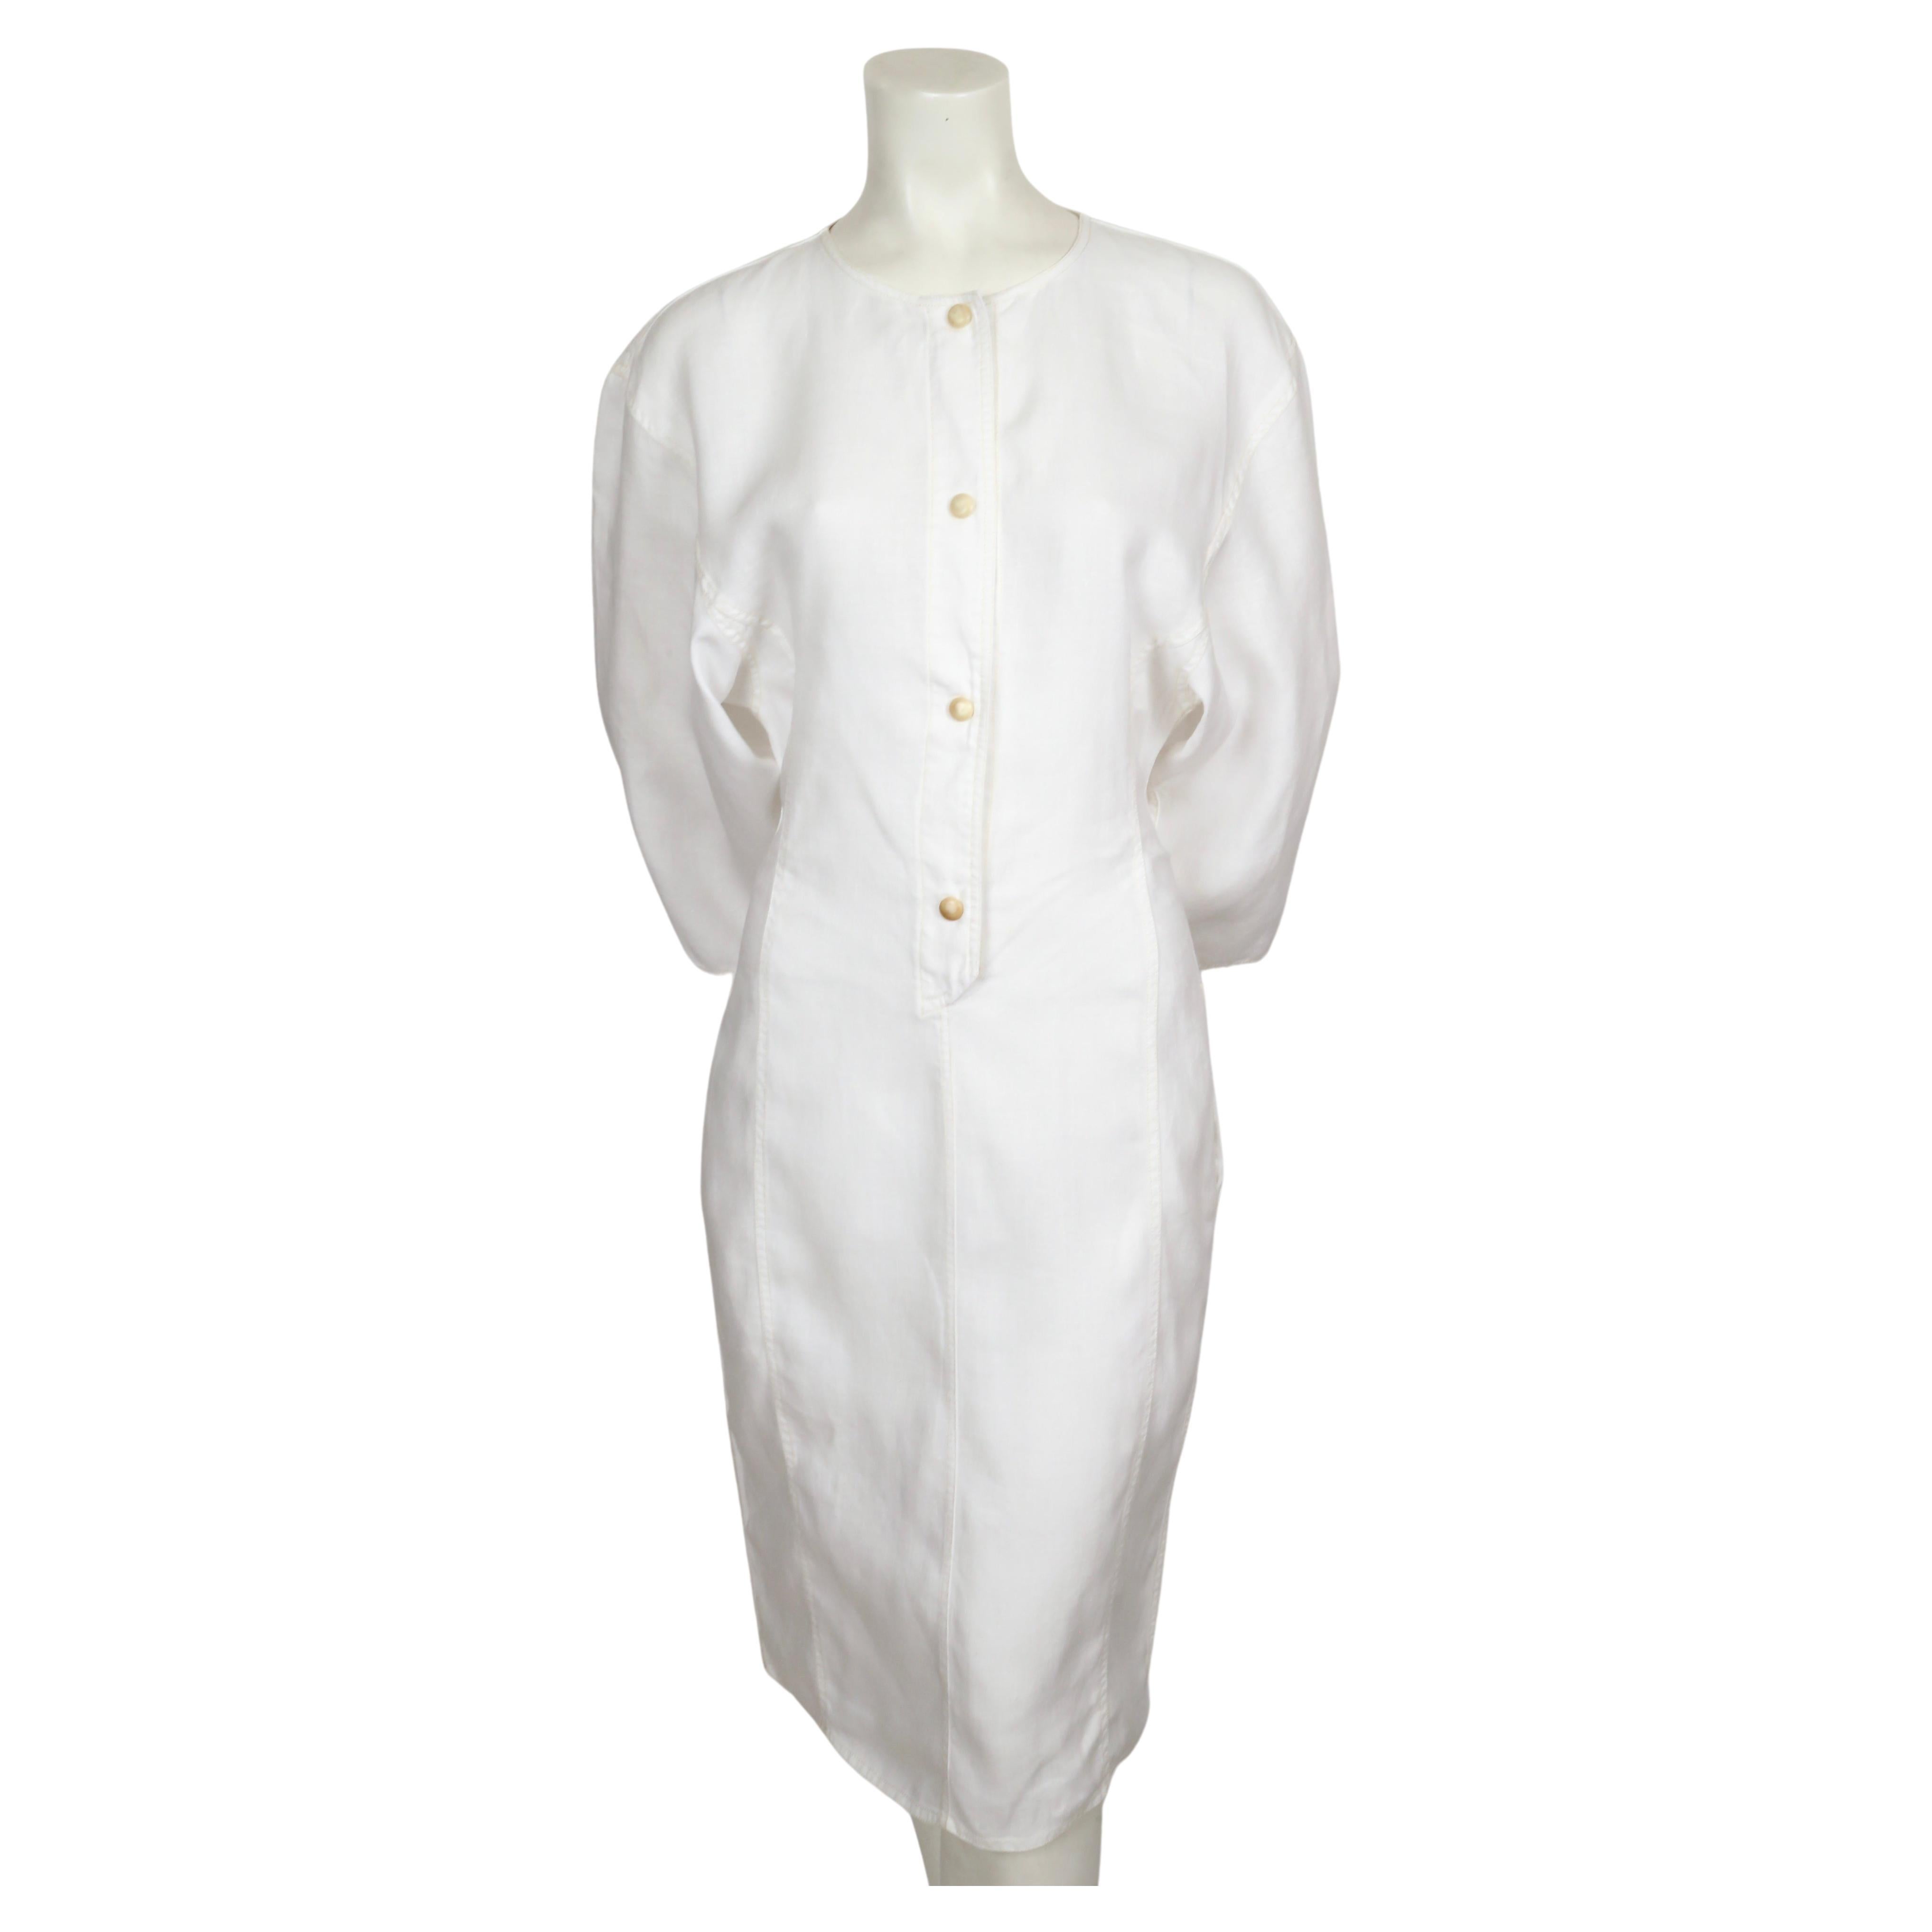 White linen dress with dolman sleeves and seamed detail designed by Anne Marie Beretta dating ot the 1980's. Dress has a very flattering, strong sculptural shape to it. Labeled a French size 40 however this fits small so it would better suit a